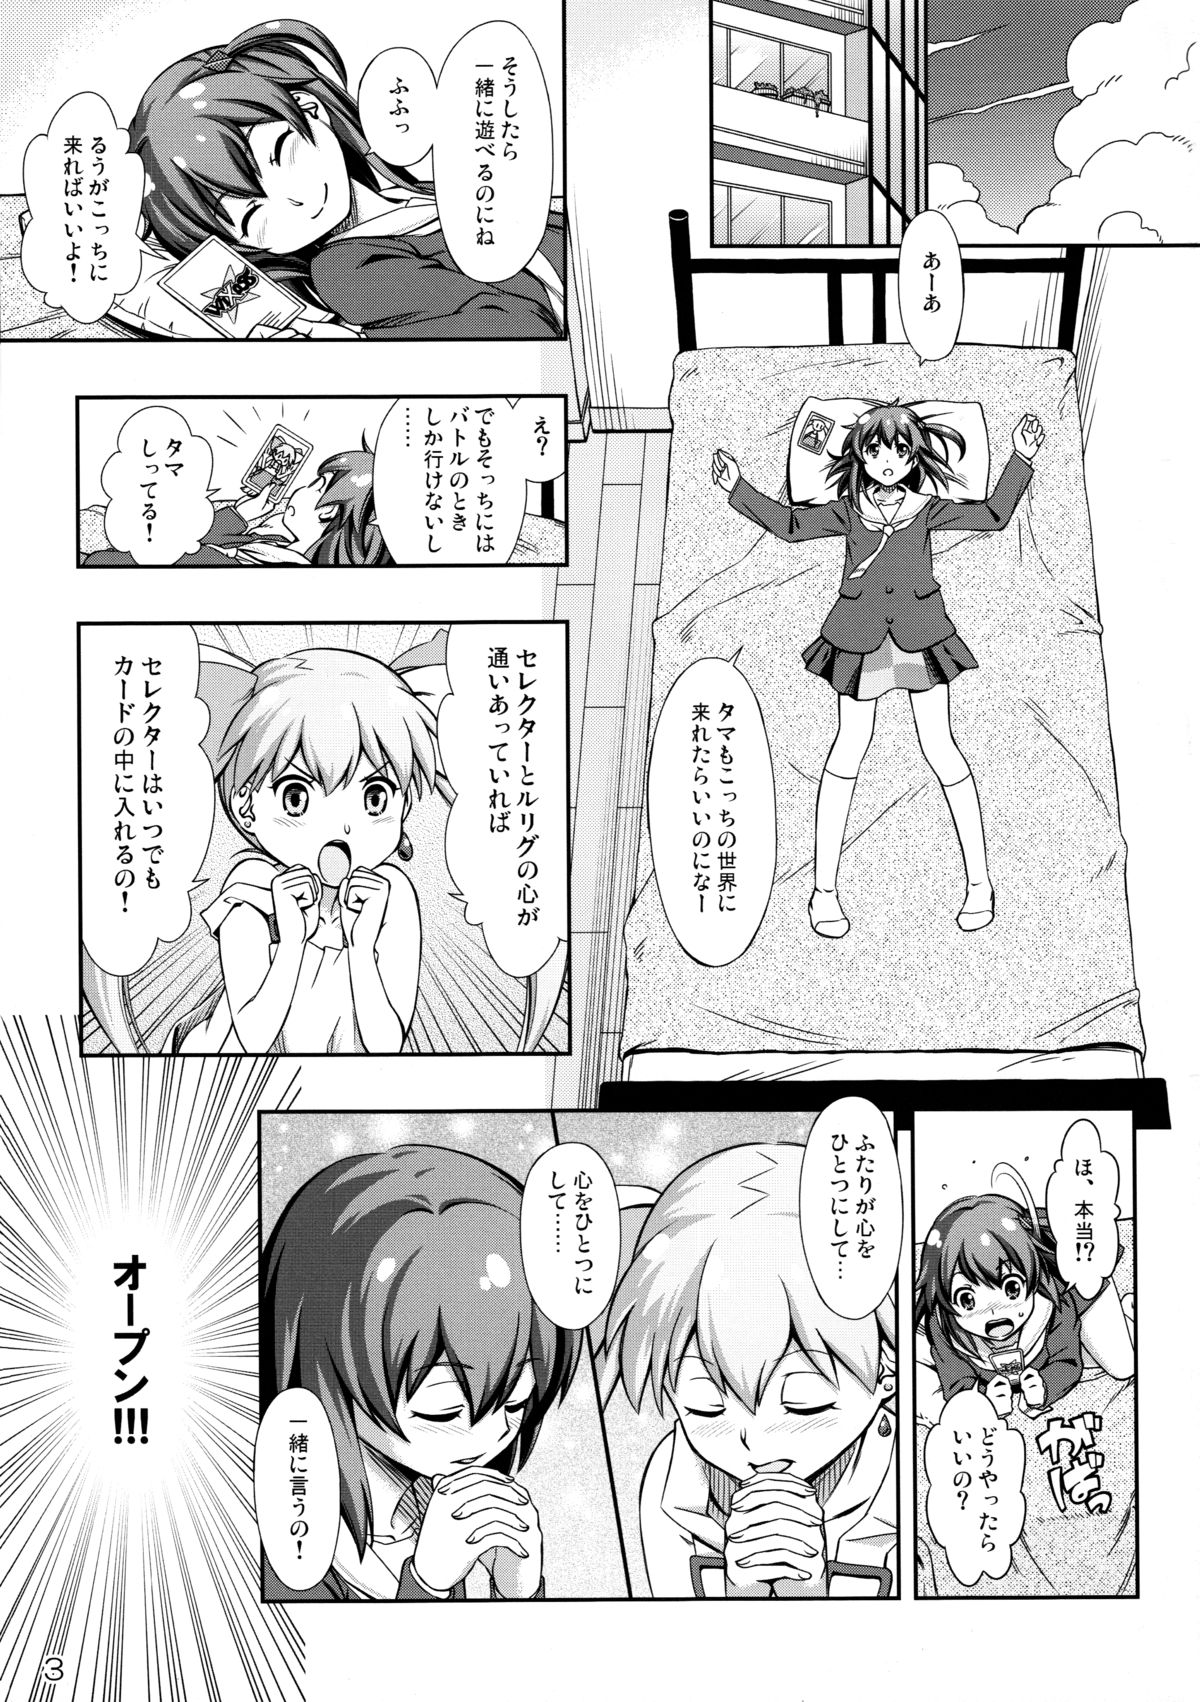 (Futaket 10.5) [YOU2HP (YOU2)] Immoral Batou! (Selector Infected WIXOSS) [Decensored] page 3 full